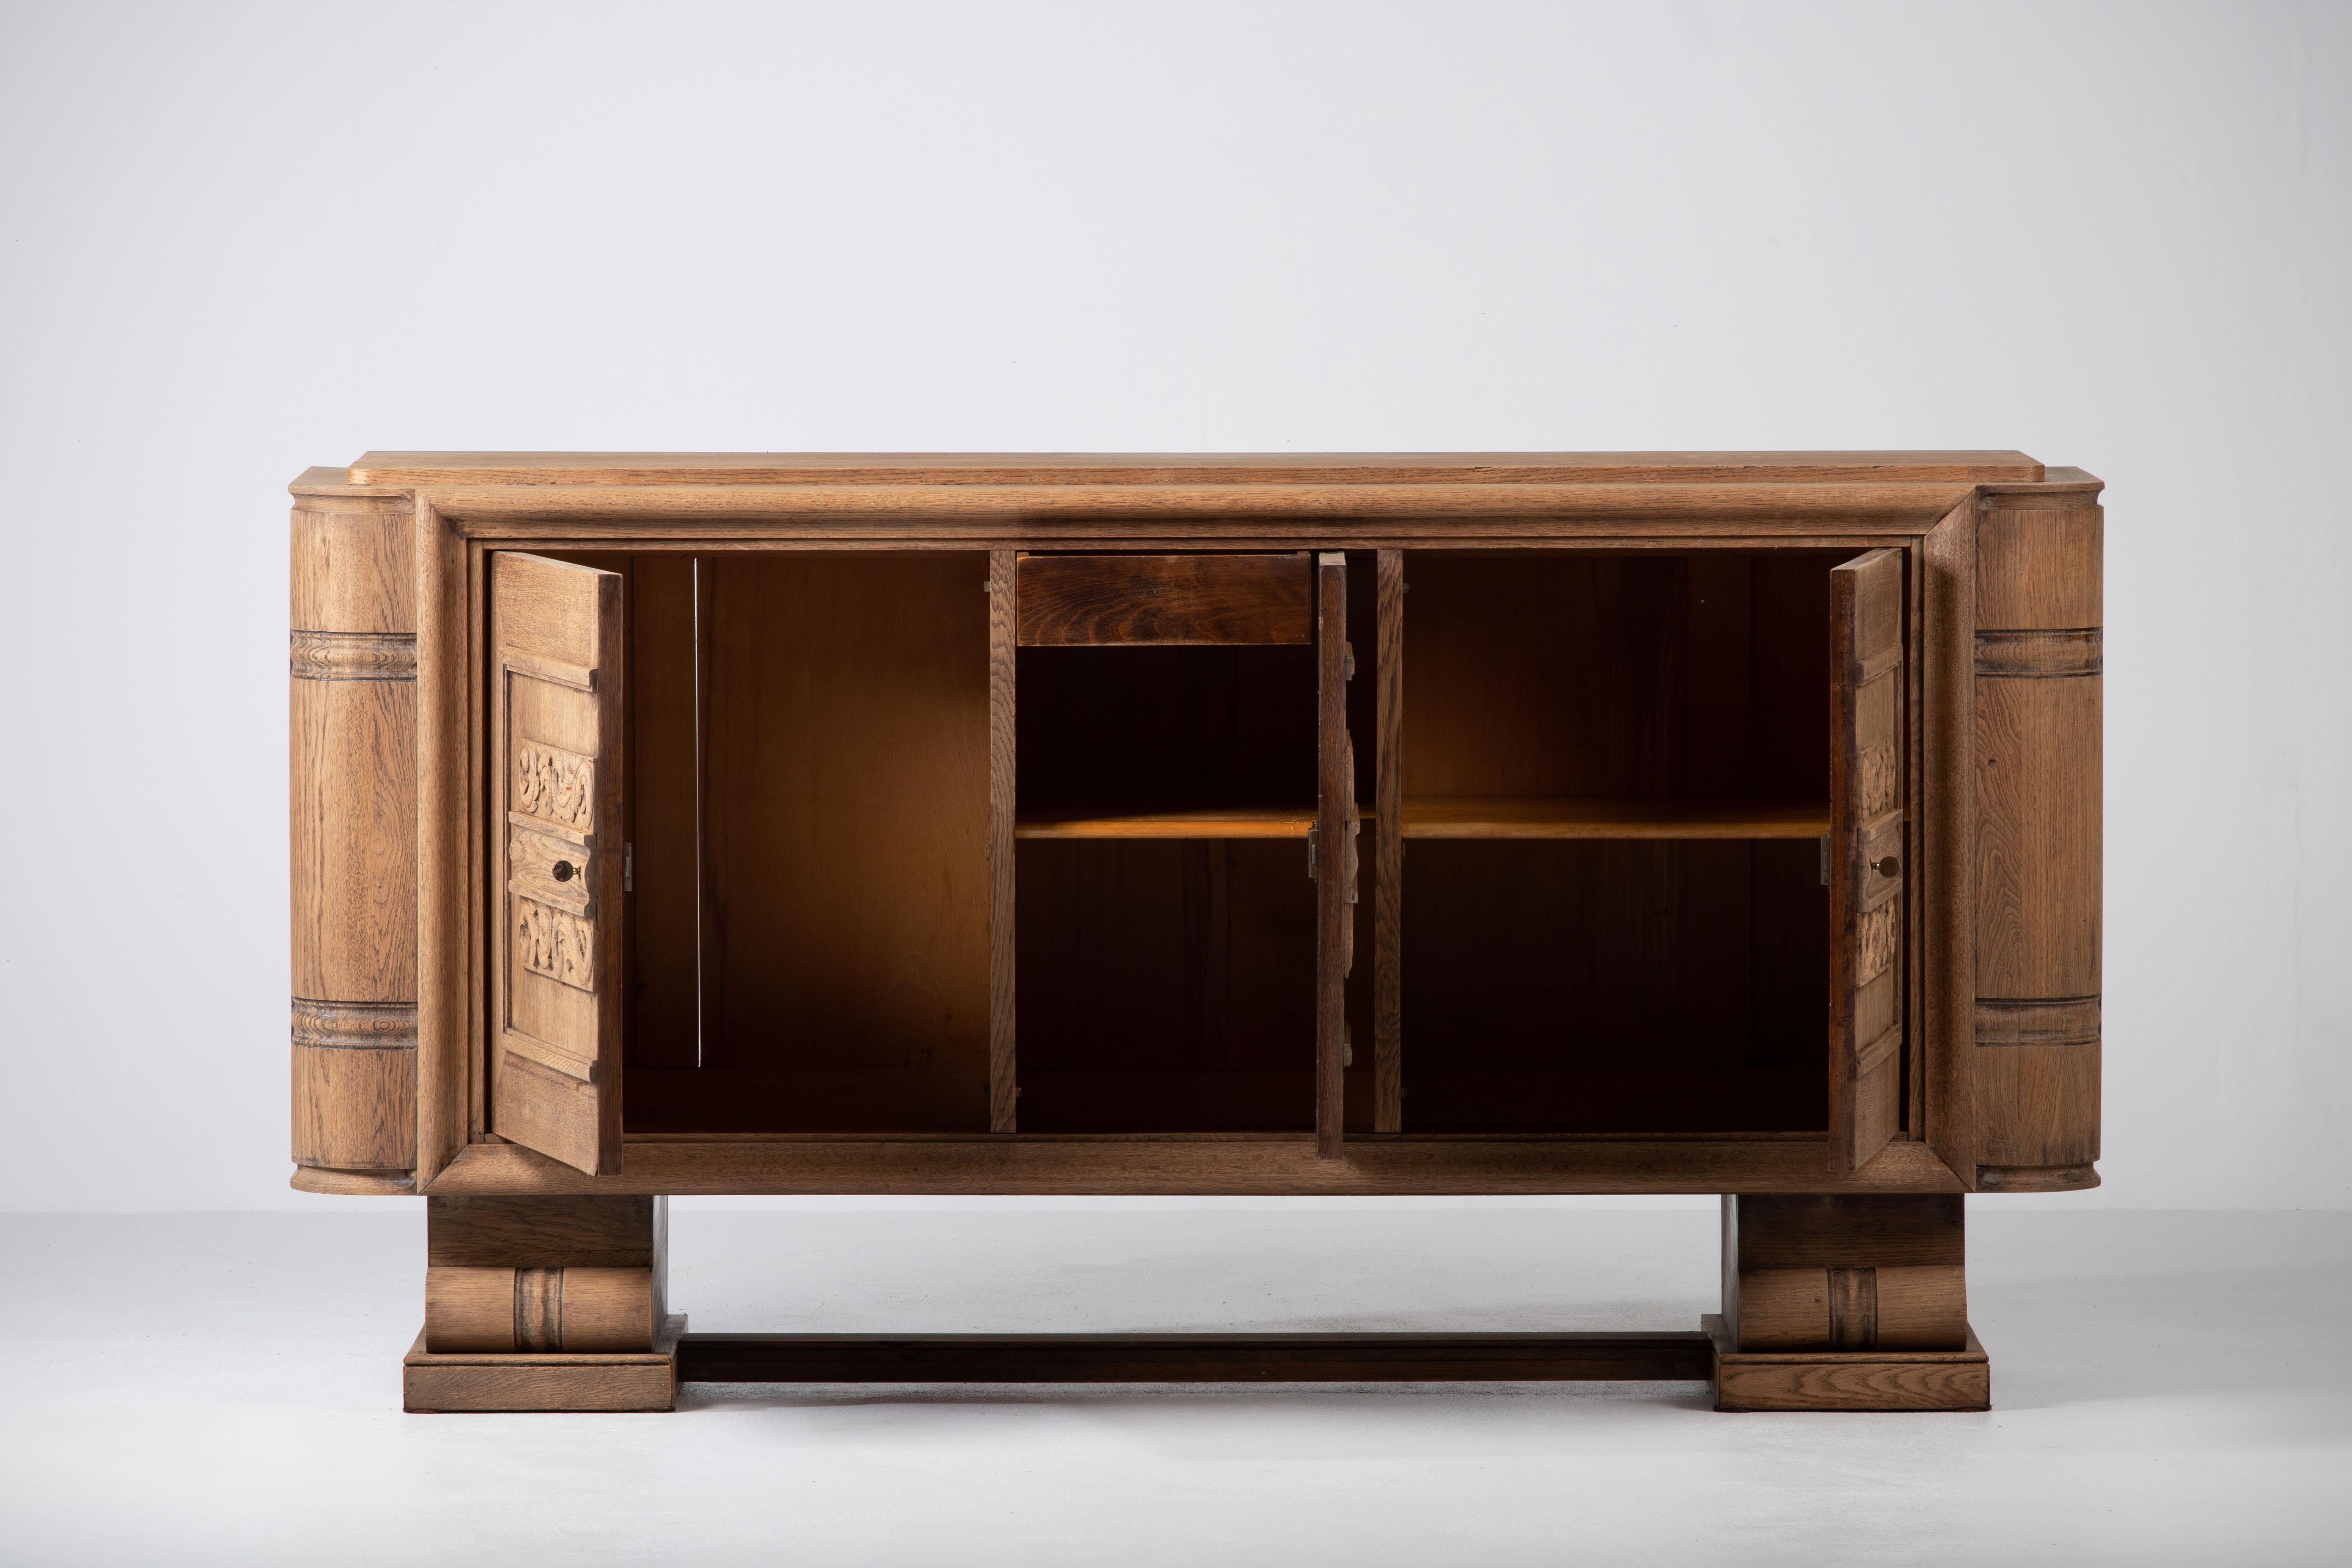 Large Art Deco Brutalist sideboard, France, 1940.
The credenza consists of three storage facilities with a handcarved foliage on the doors.
The refined wooden structures on the doors create a striking combination with the otherwise sturdy and